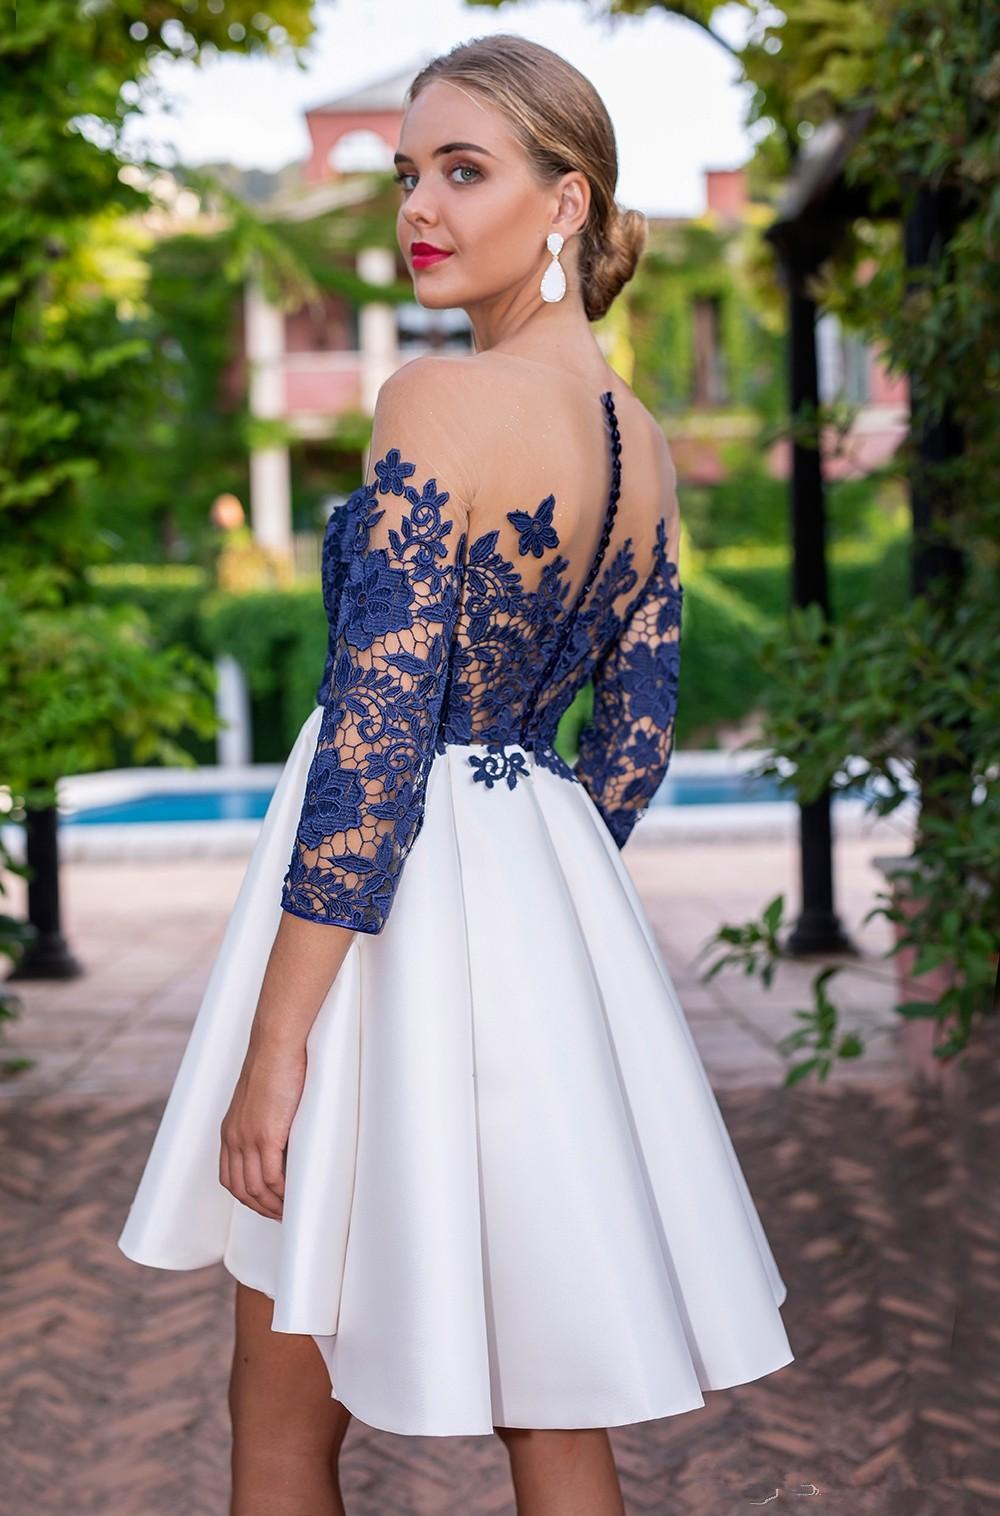 Image of 2022 Lace Homecoming Dresses With Illusion Long Sleeves V-Neck Short Formal Party Prom Gowns Mini Modern Special robes de soirÃ©e